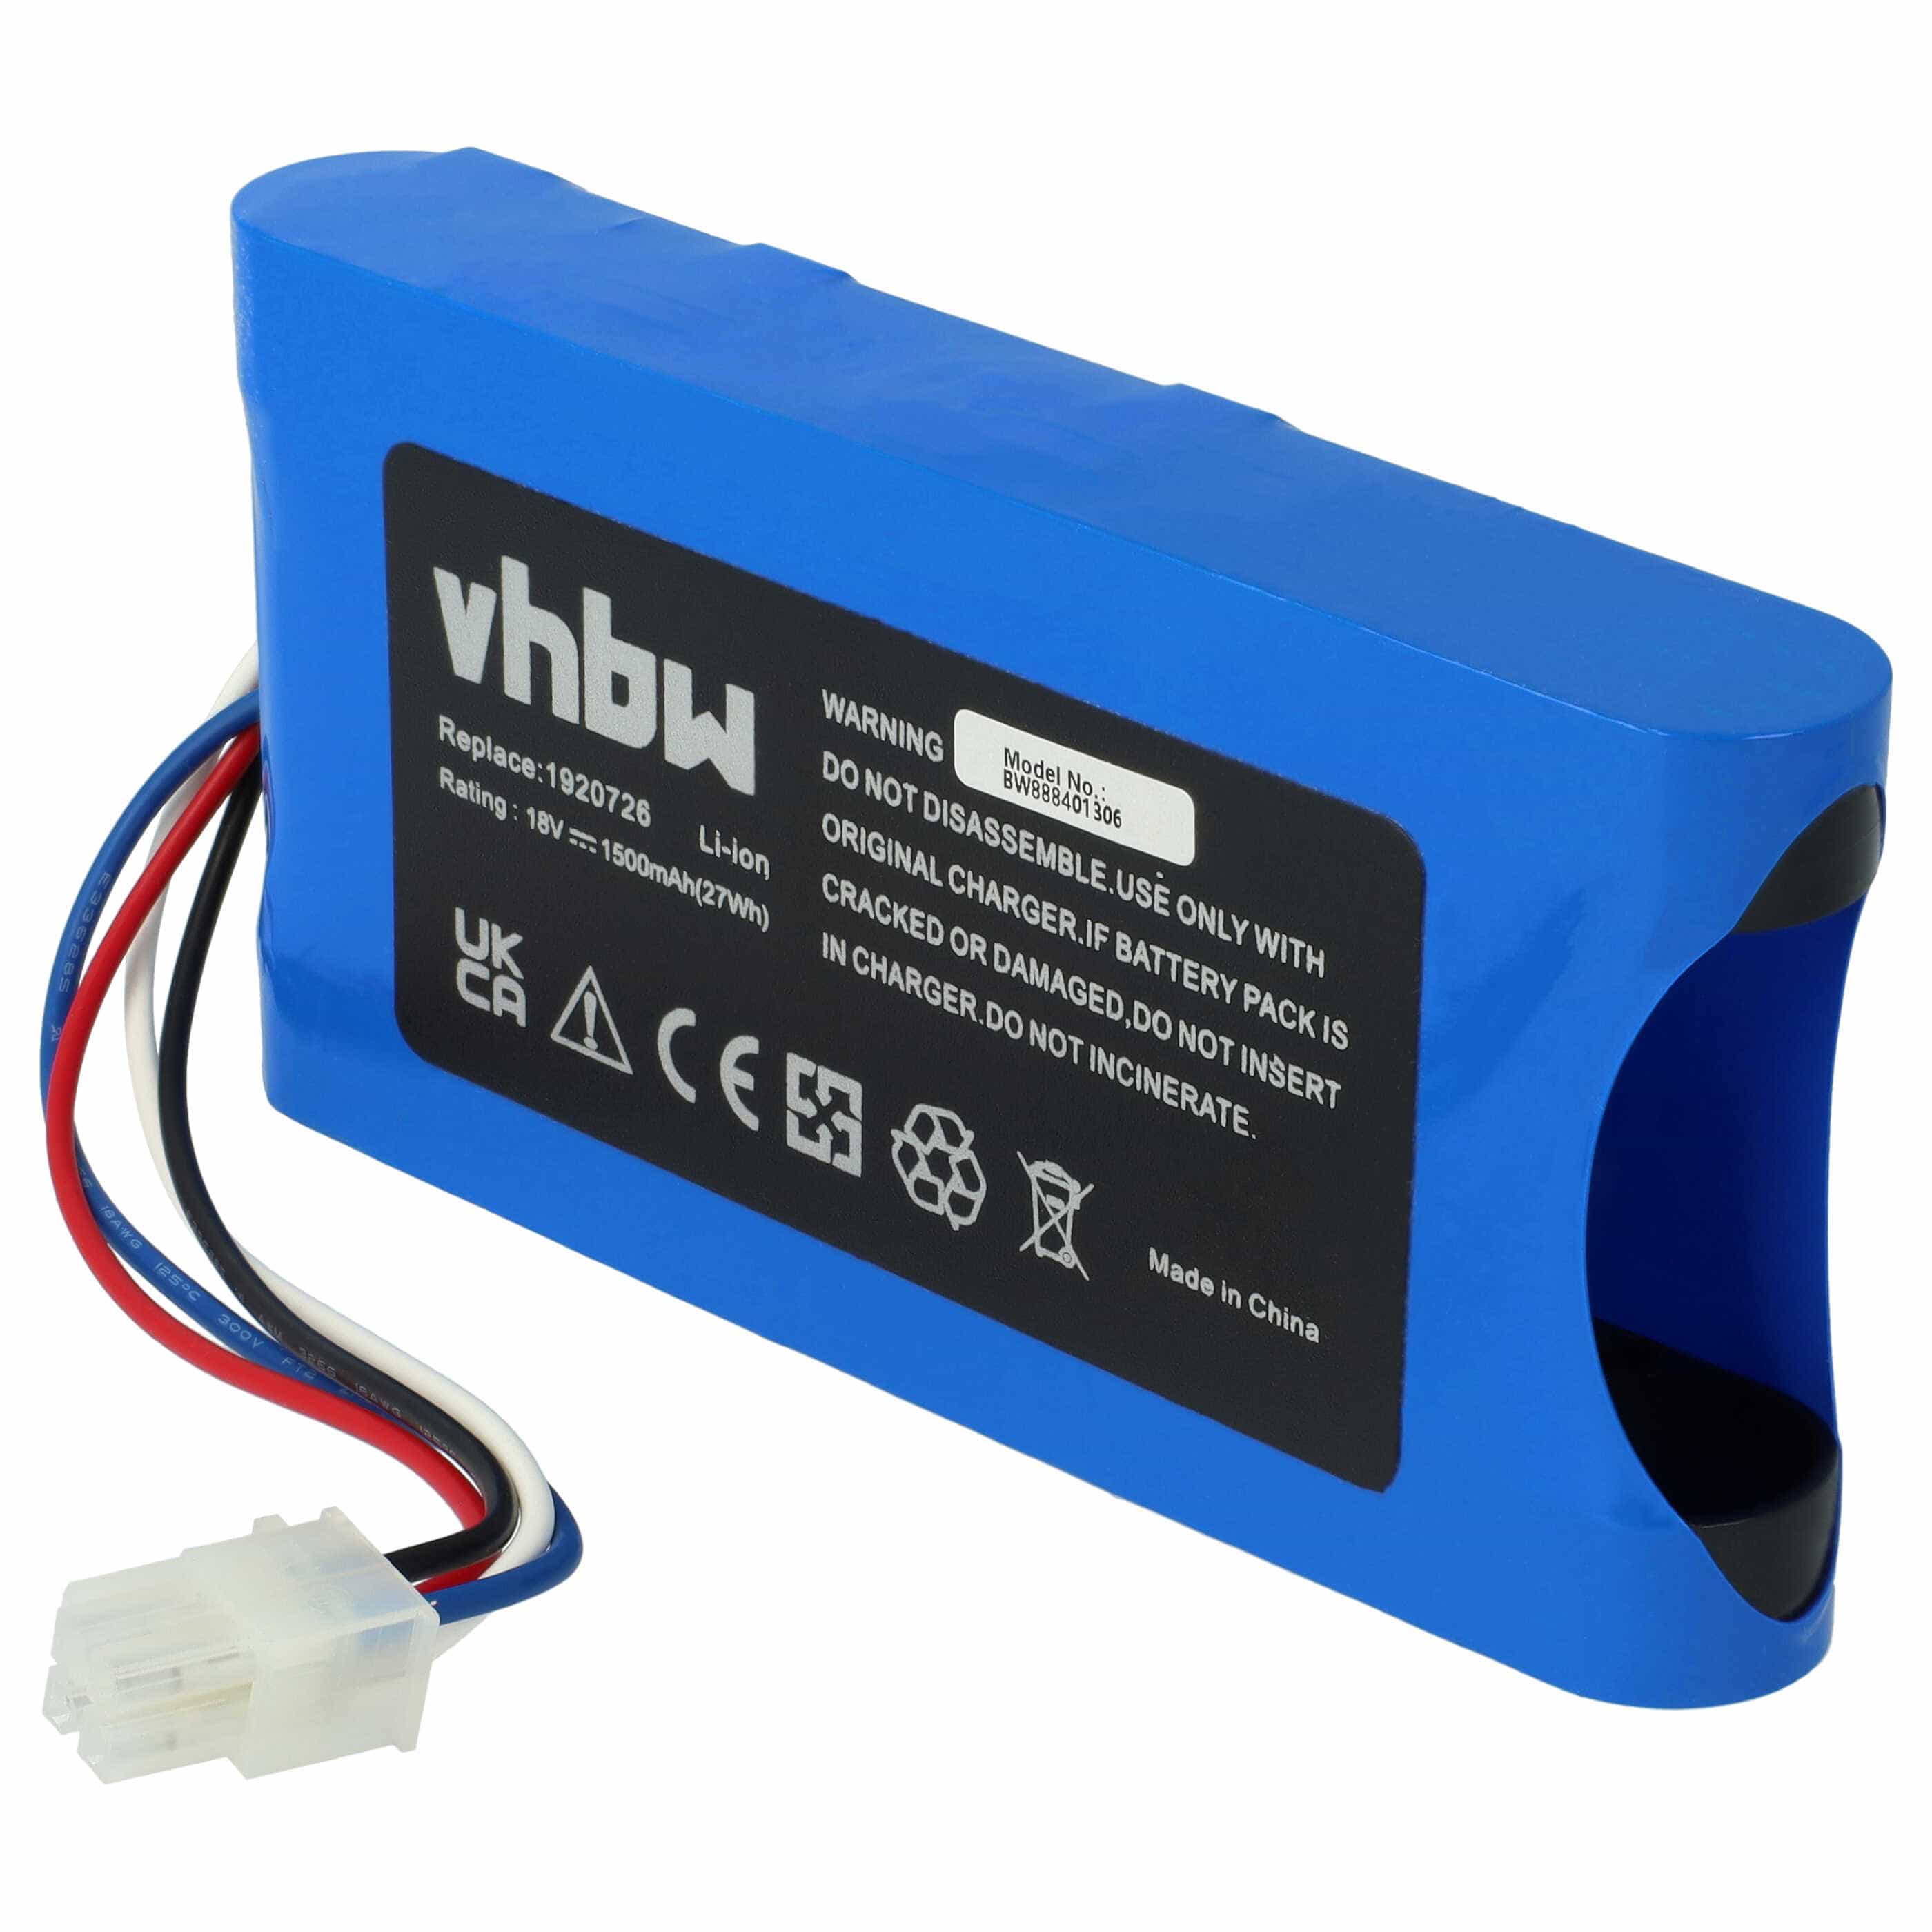 Lawnmower Battery Replacement for Yard Force 1920726 - 1500mAh 18V Li-Ion